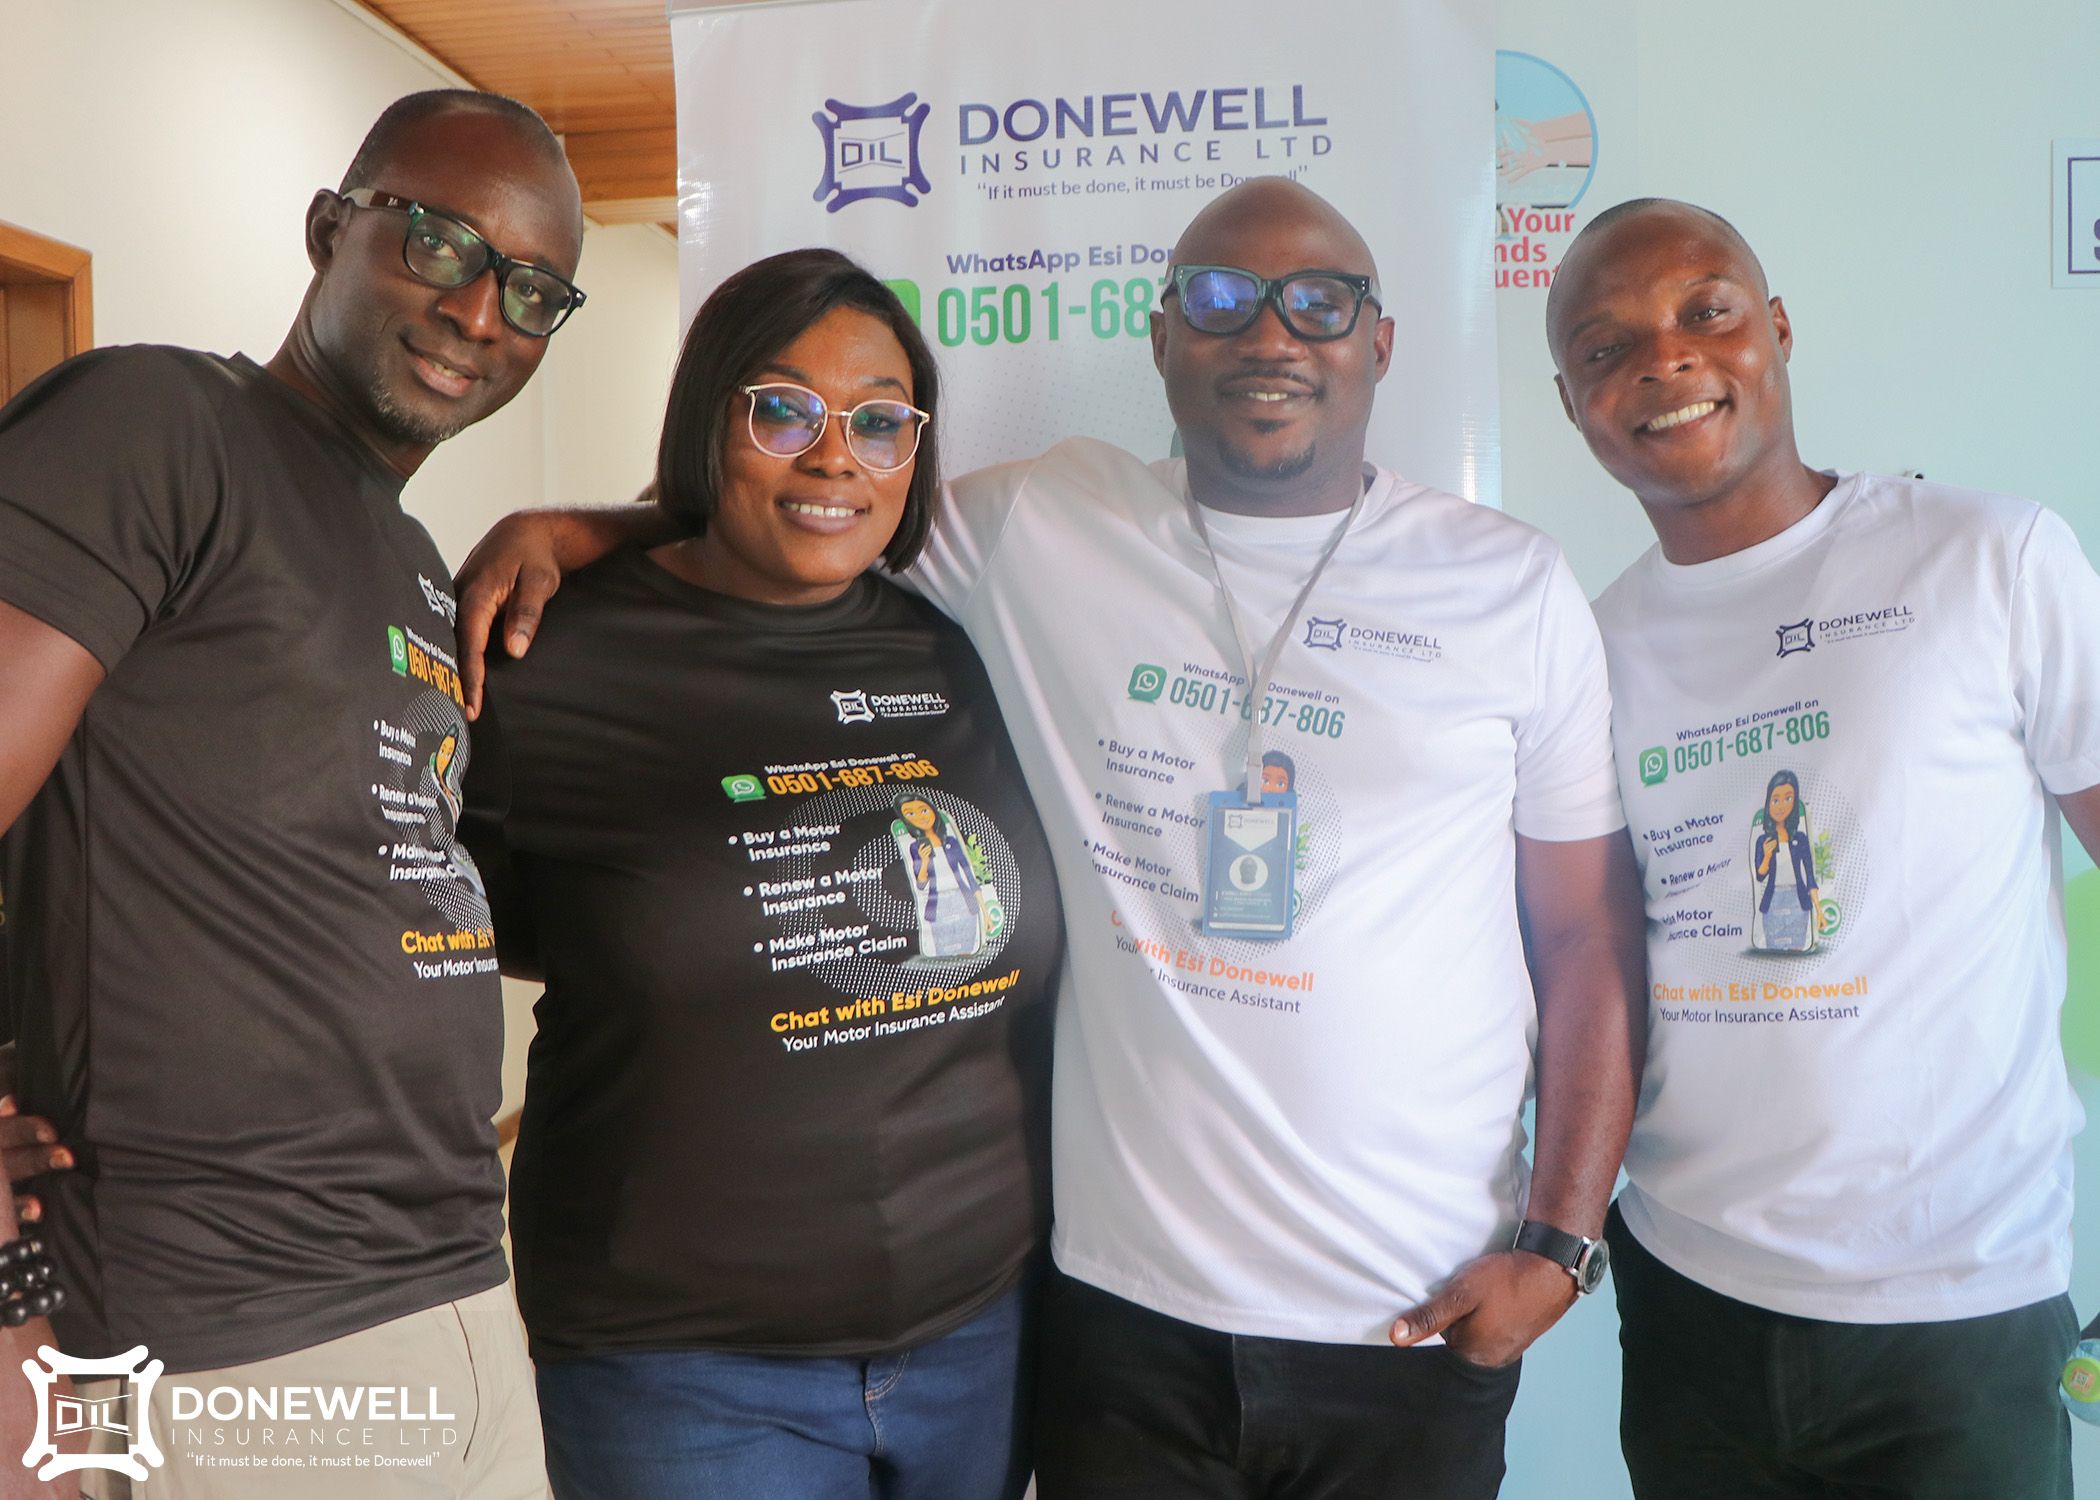 LAUNCH OF ESI DONEWELL images